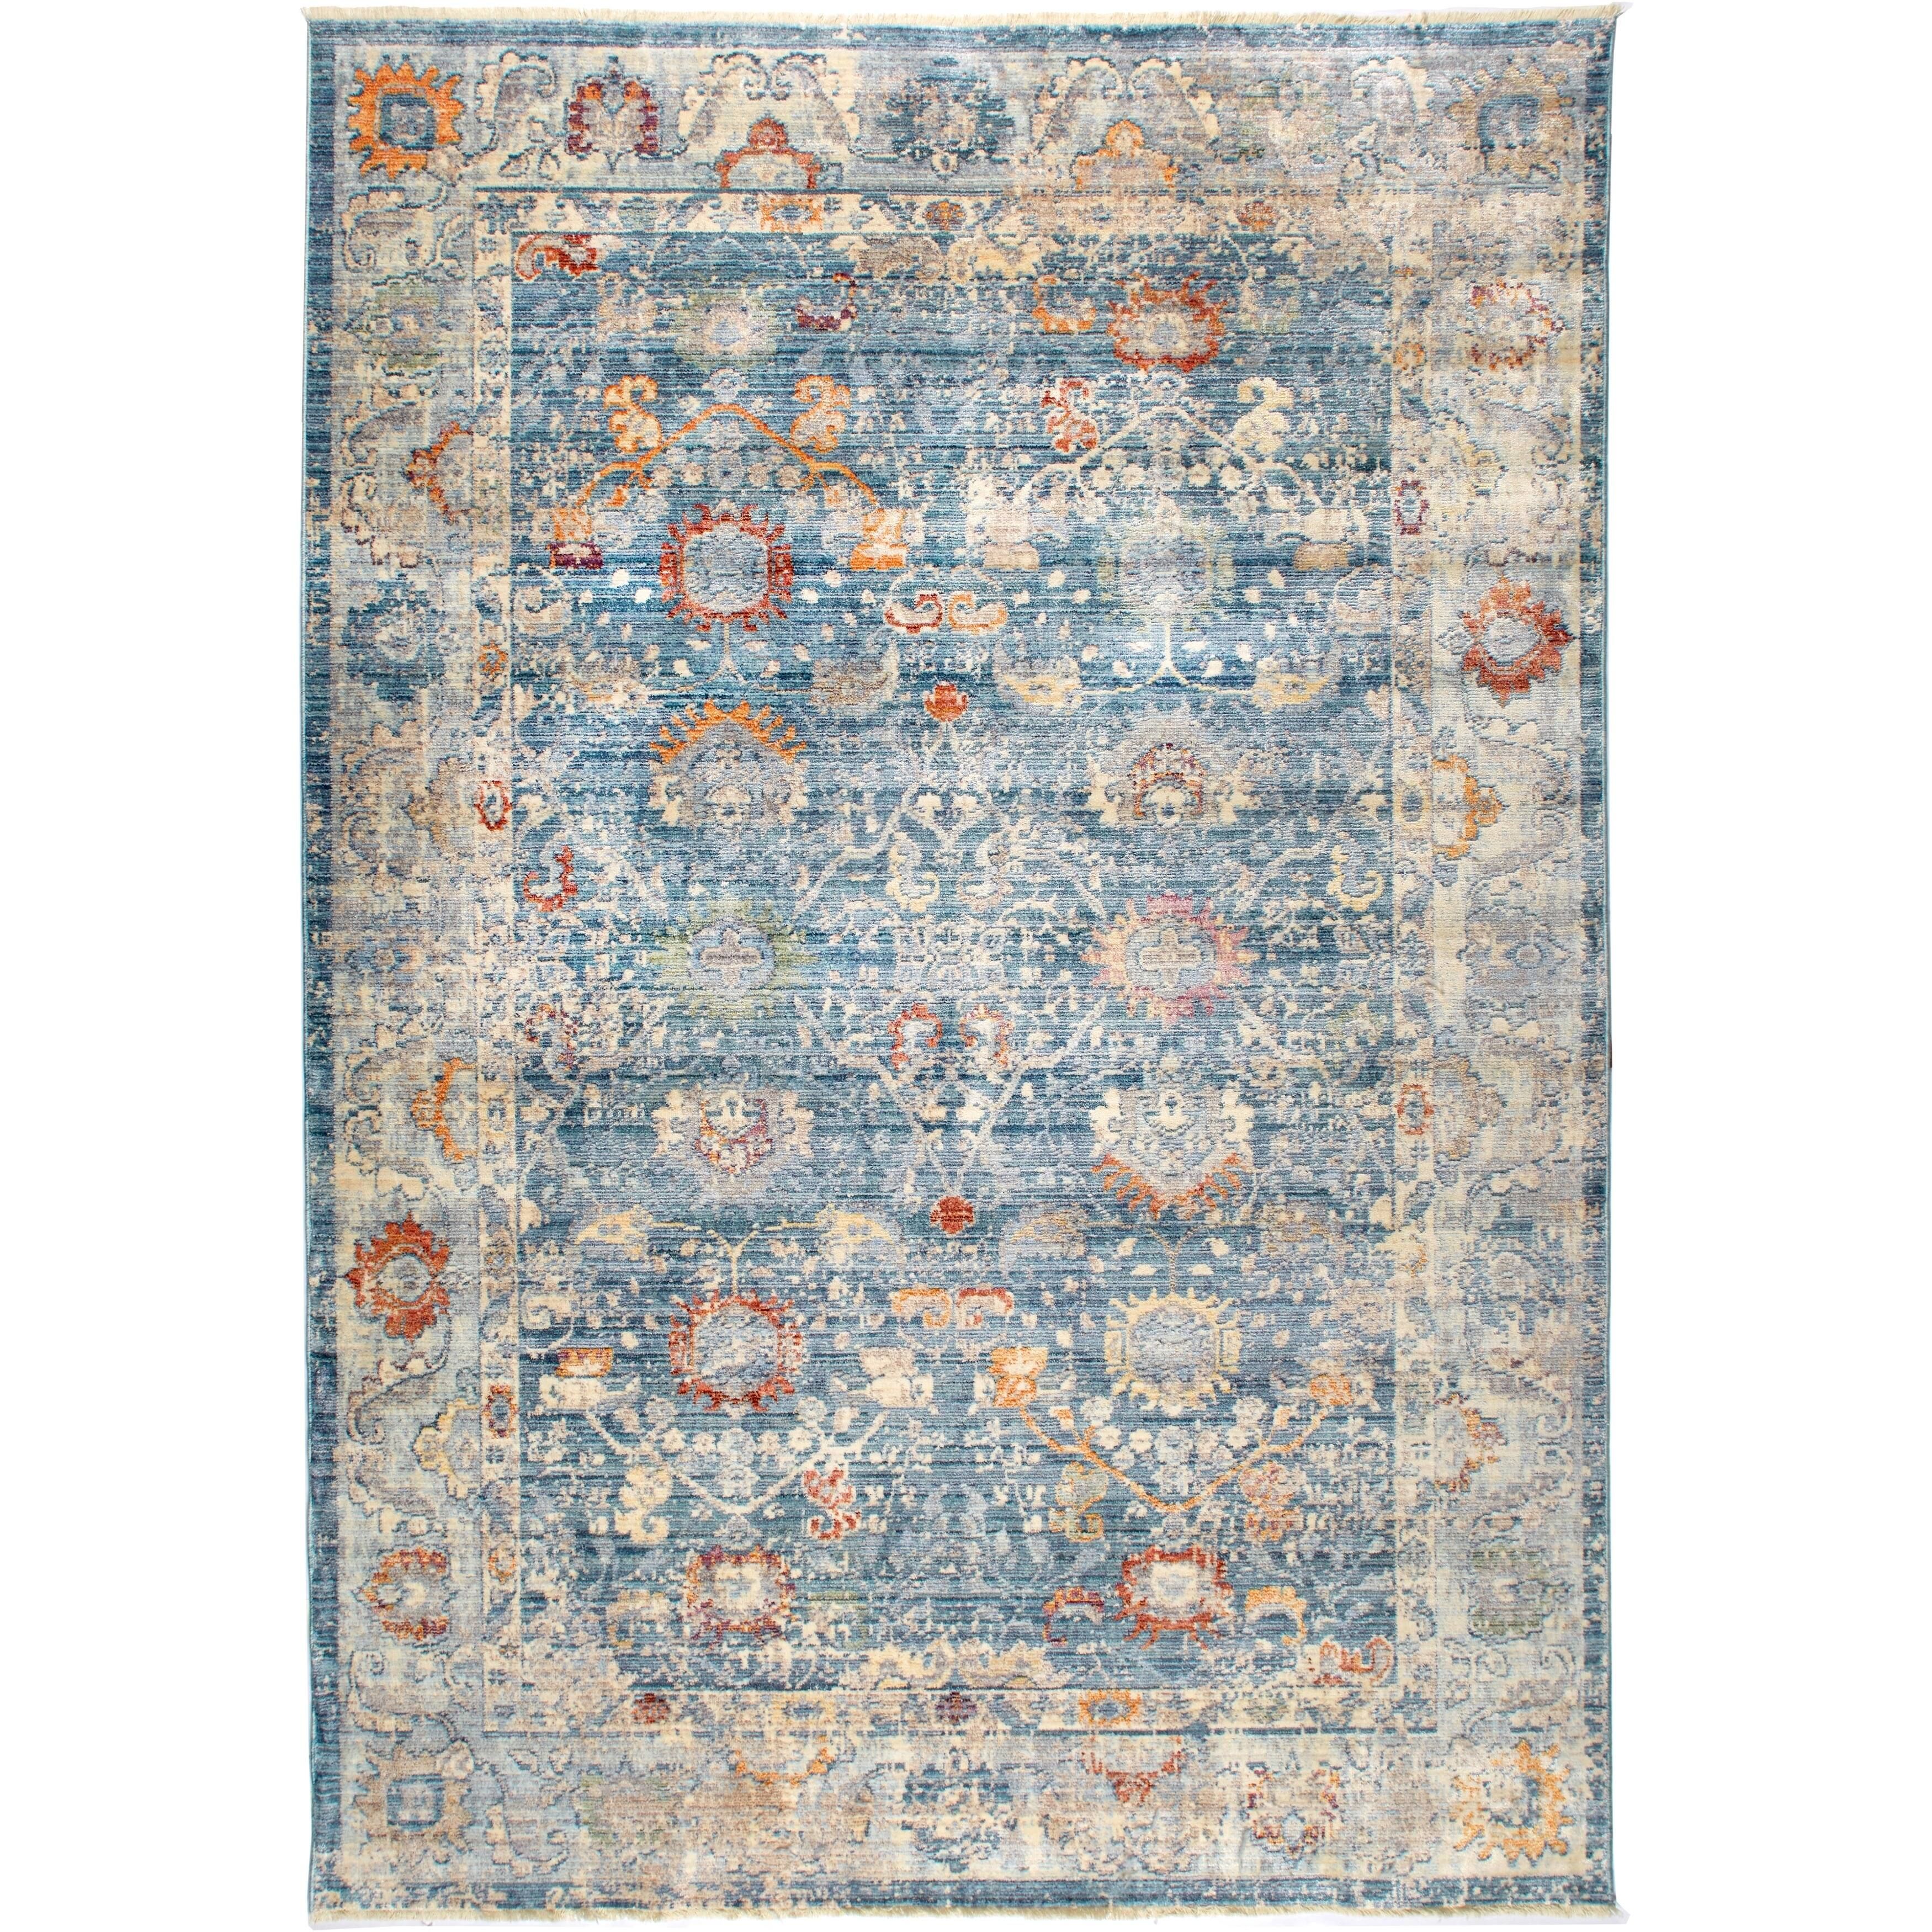 Artisan Turquoise Bordered Area Rug with Fringe by Nicole Miller - 7'10"x10'2" | Bed Bath & Beyond